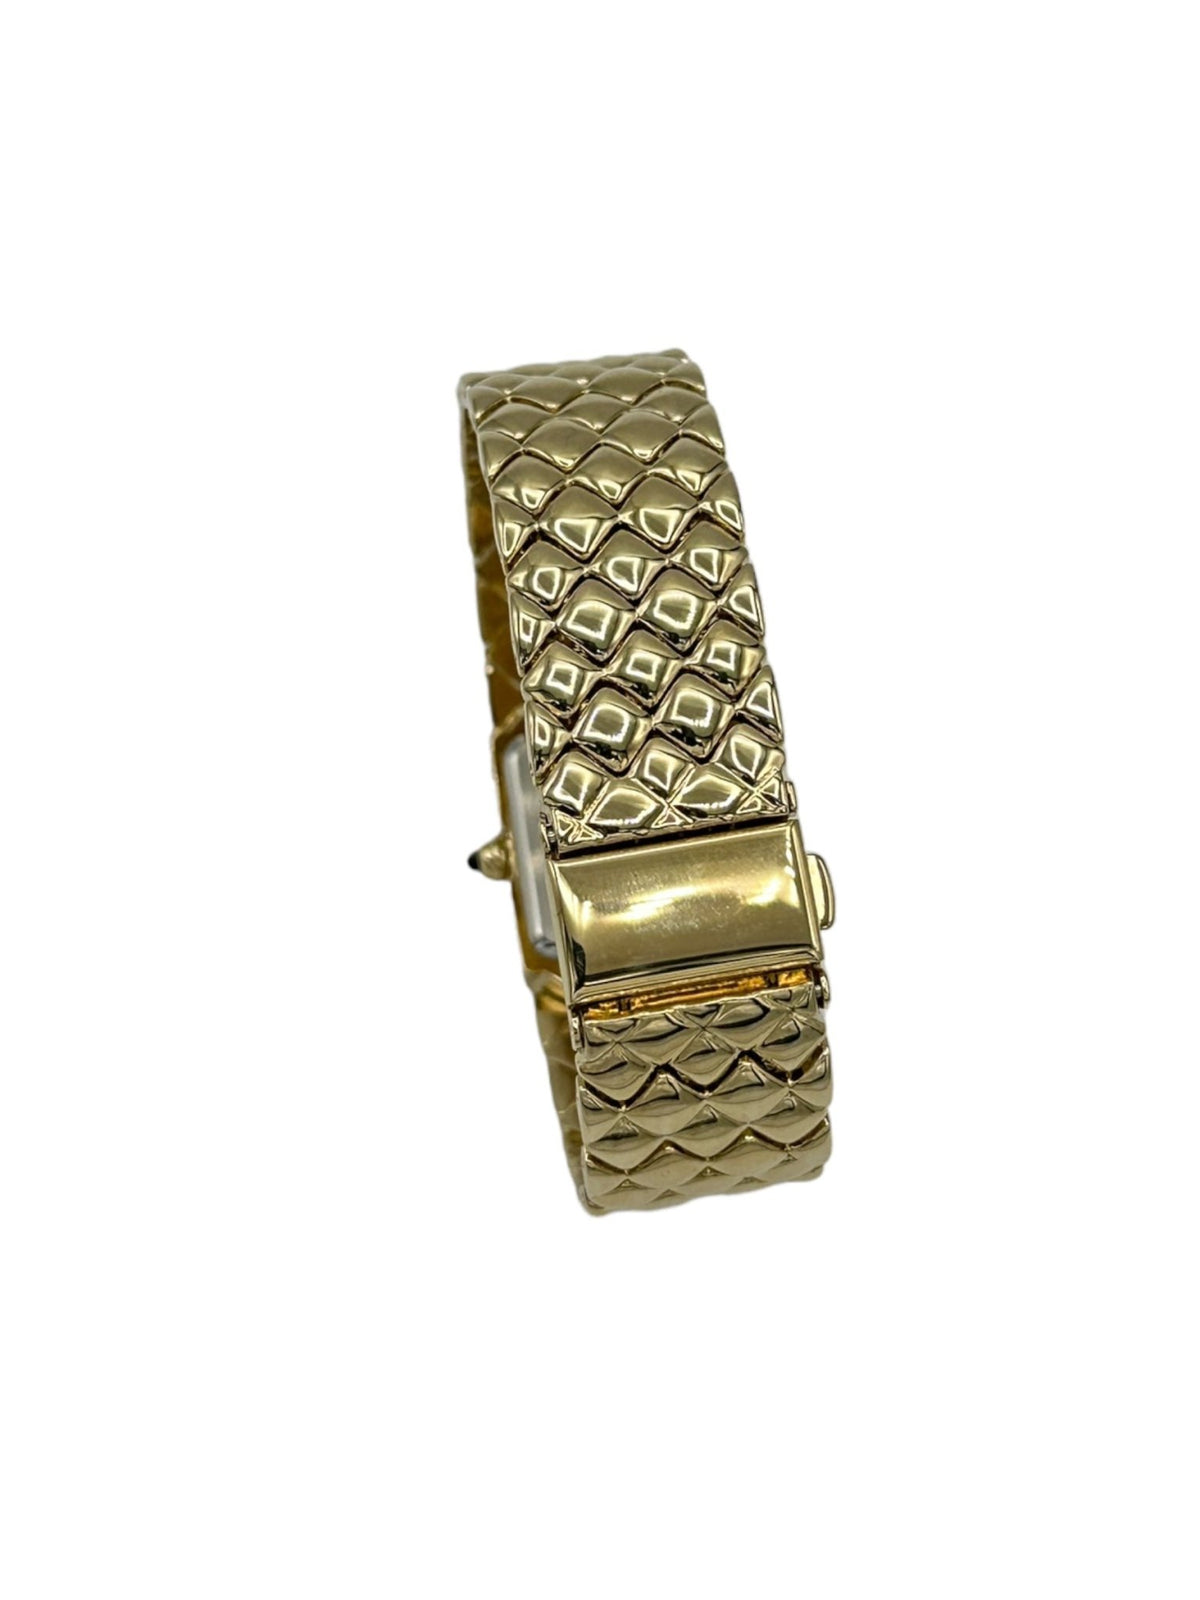 Joan Rivers Gold Quilted Band Beveled Face Wristwatch - 24 Wishes Vintage Jewelry